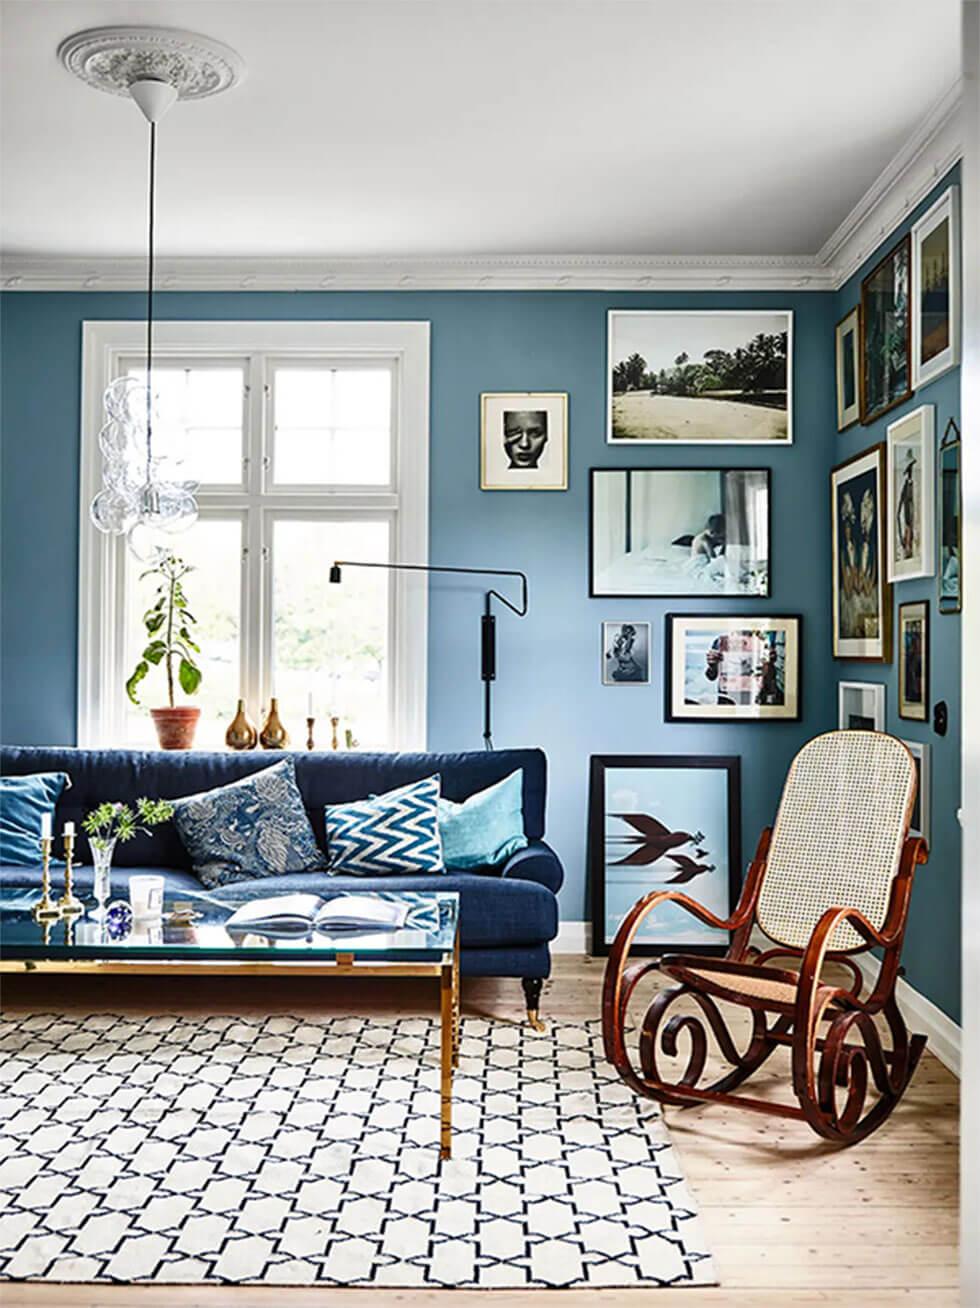 8 cool ideas for blue living room ideas (from tranquil to vibrant